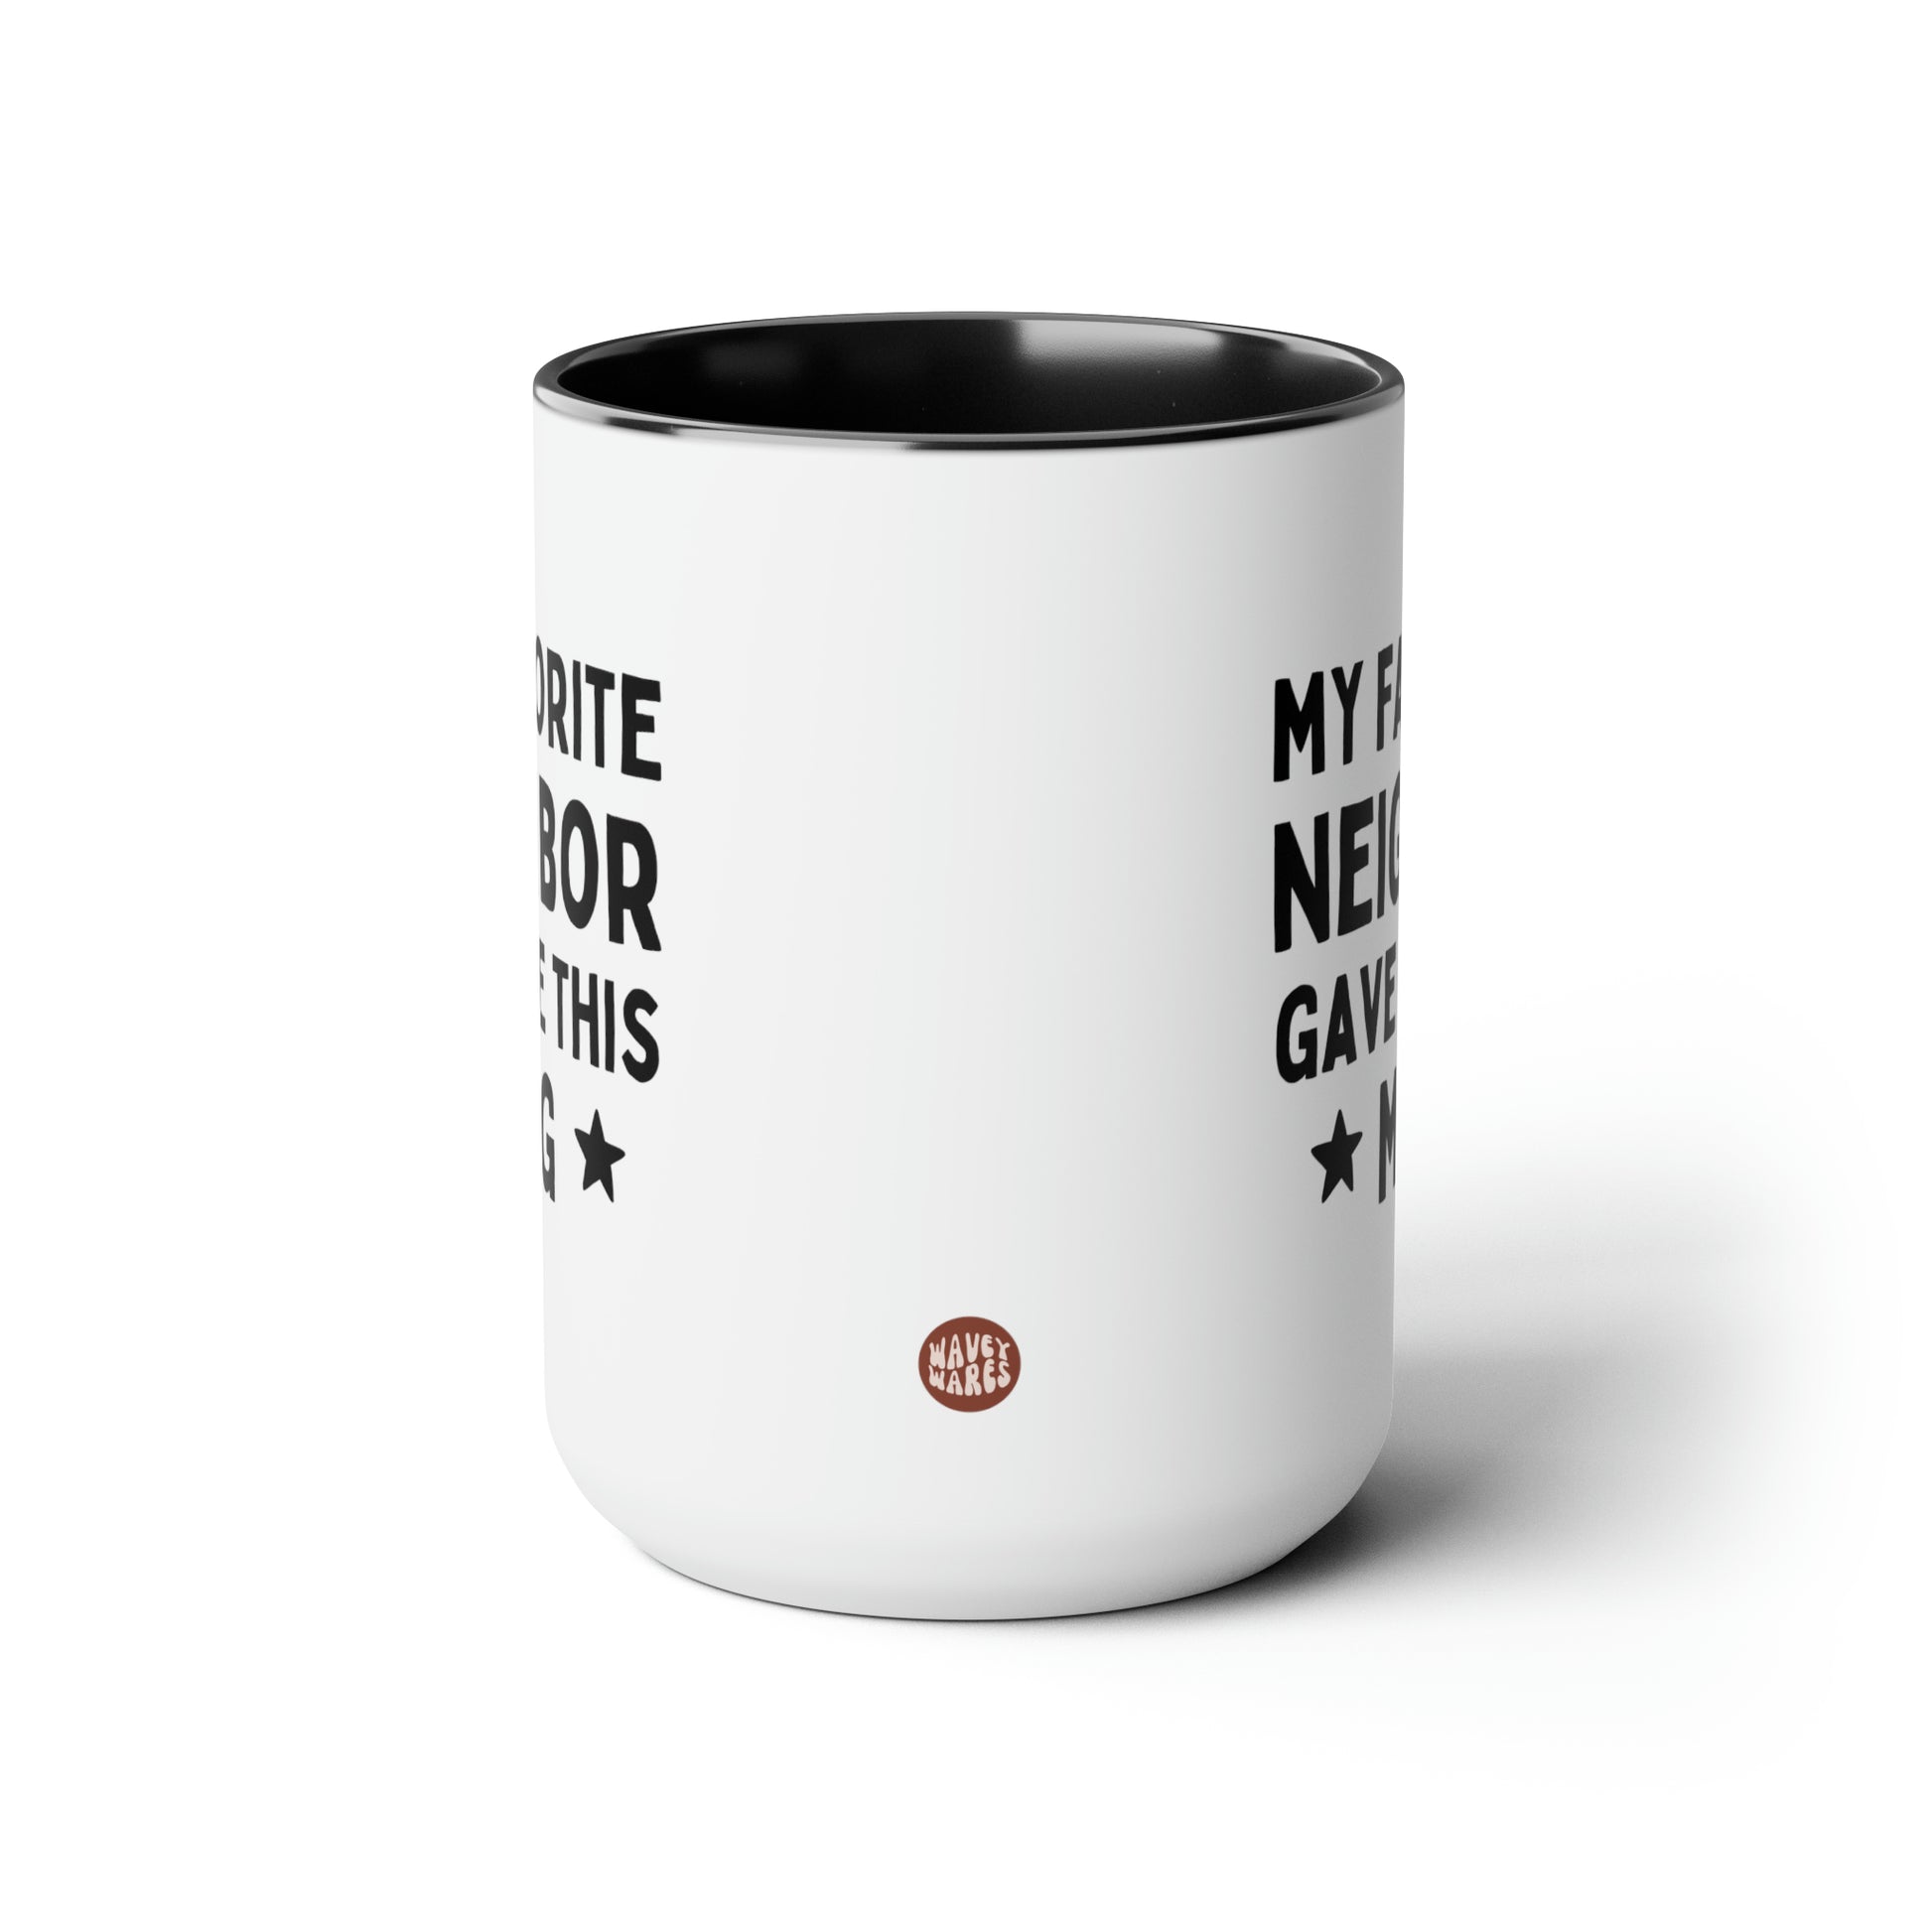 My Favorite Neighbor Gave Me This Mug 15oz white with black accent funny large coffee mug gift for moving best waveywares wavey wares wavywares wavy wares side